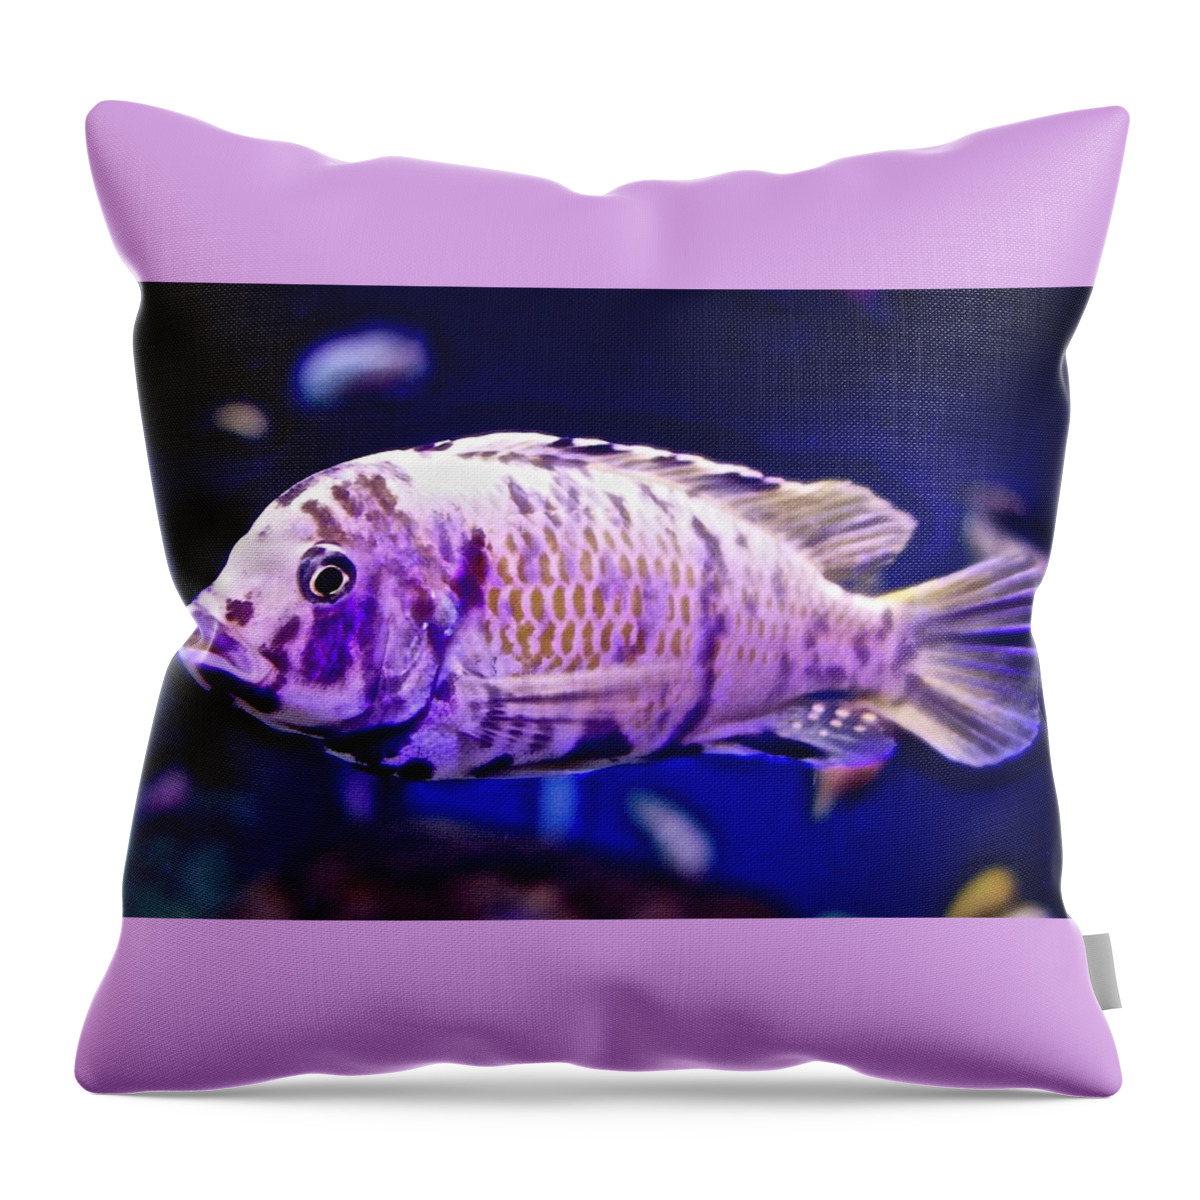 Calico Goldfish Throw Pillow featuring the photograph Calico Goldfish by Joan Reese